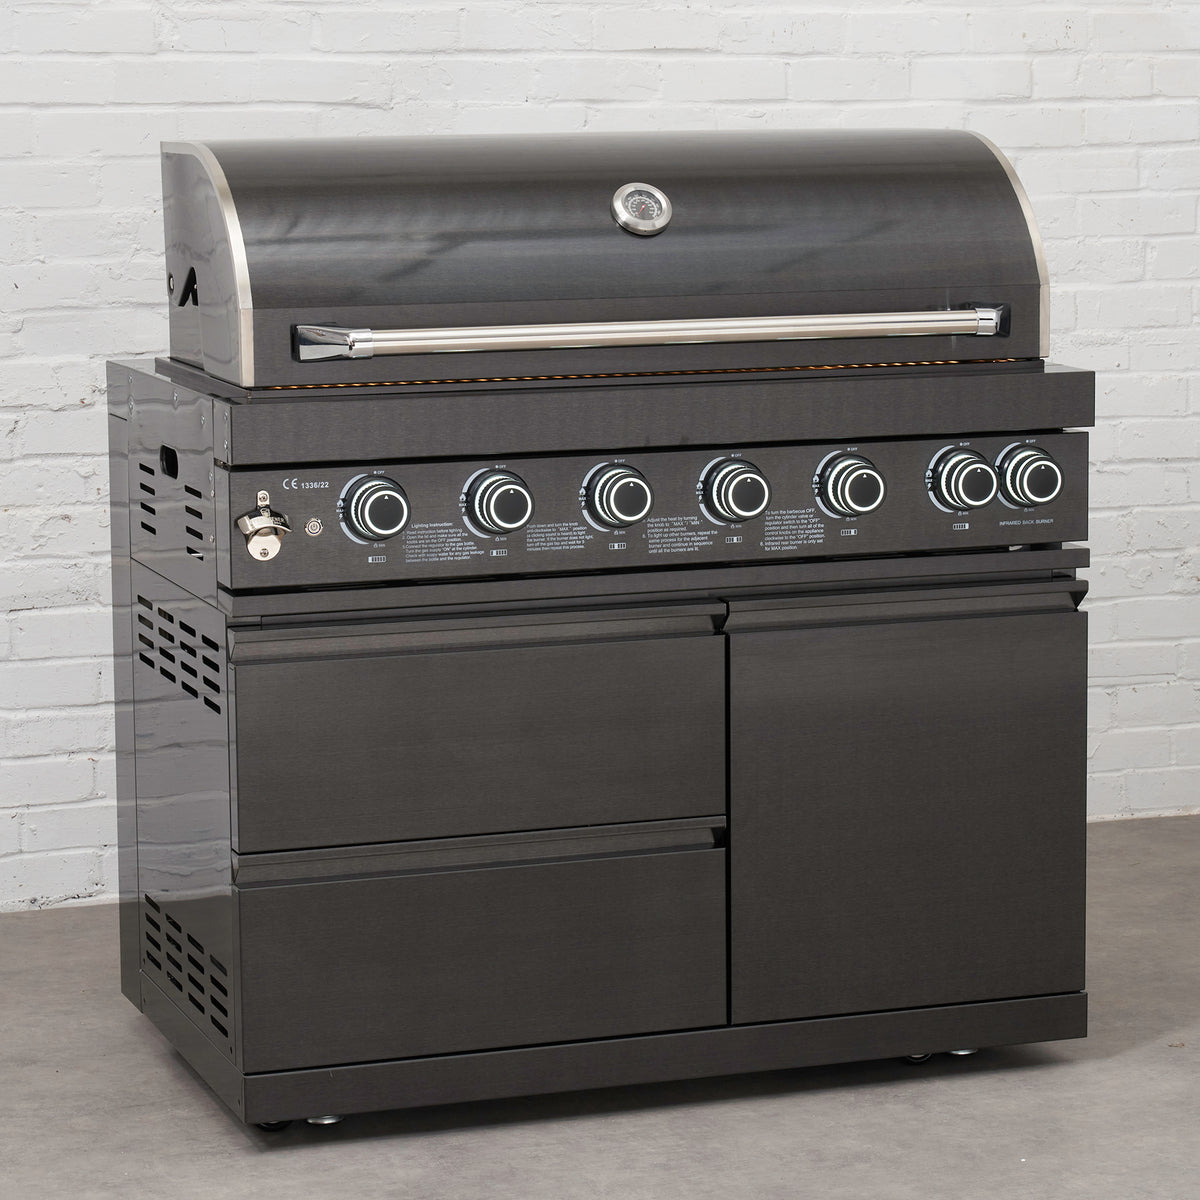 Draco Grills 6 Burner BBQ Black Stainless Steel Modular Outdoor Kitchen with Fridge and Sink Unit and Double Cabinet